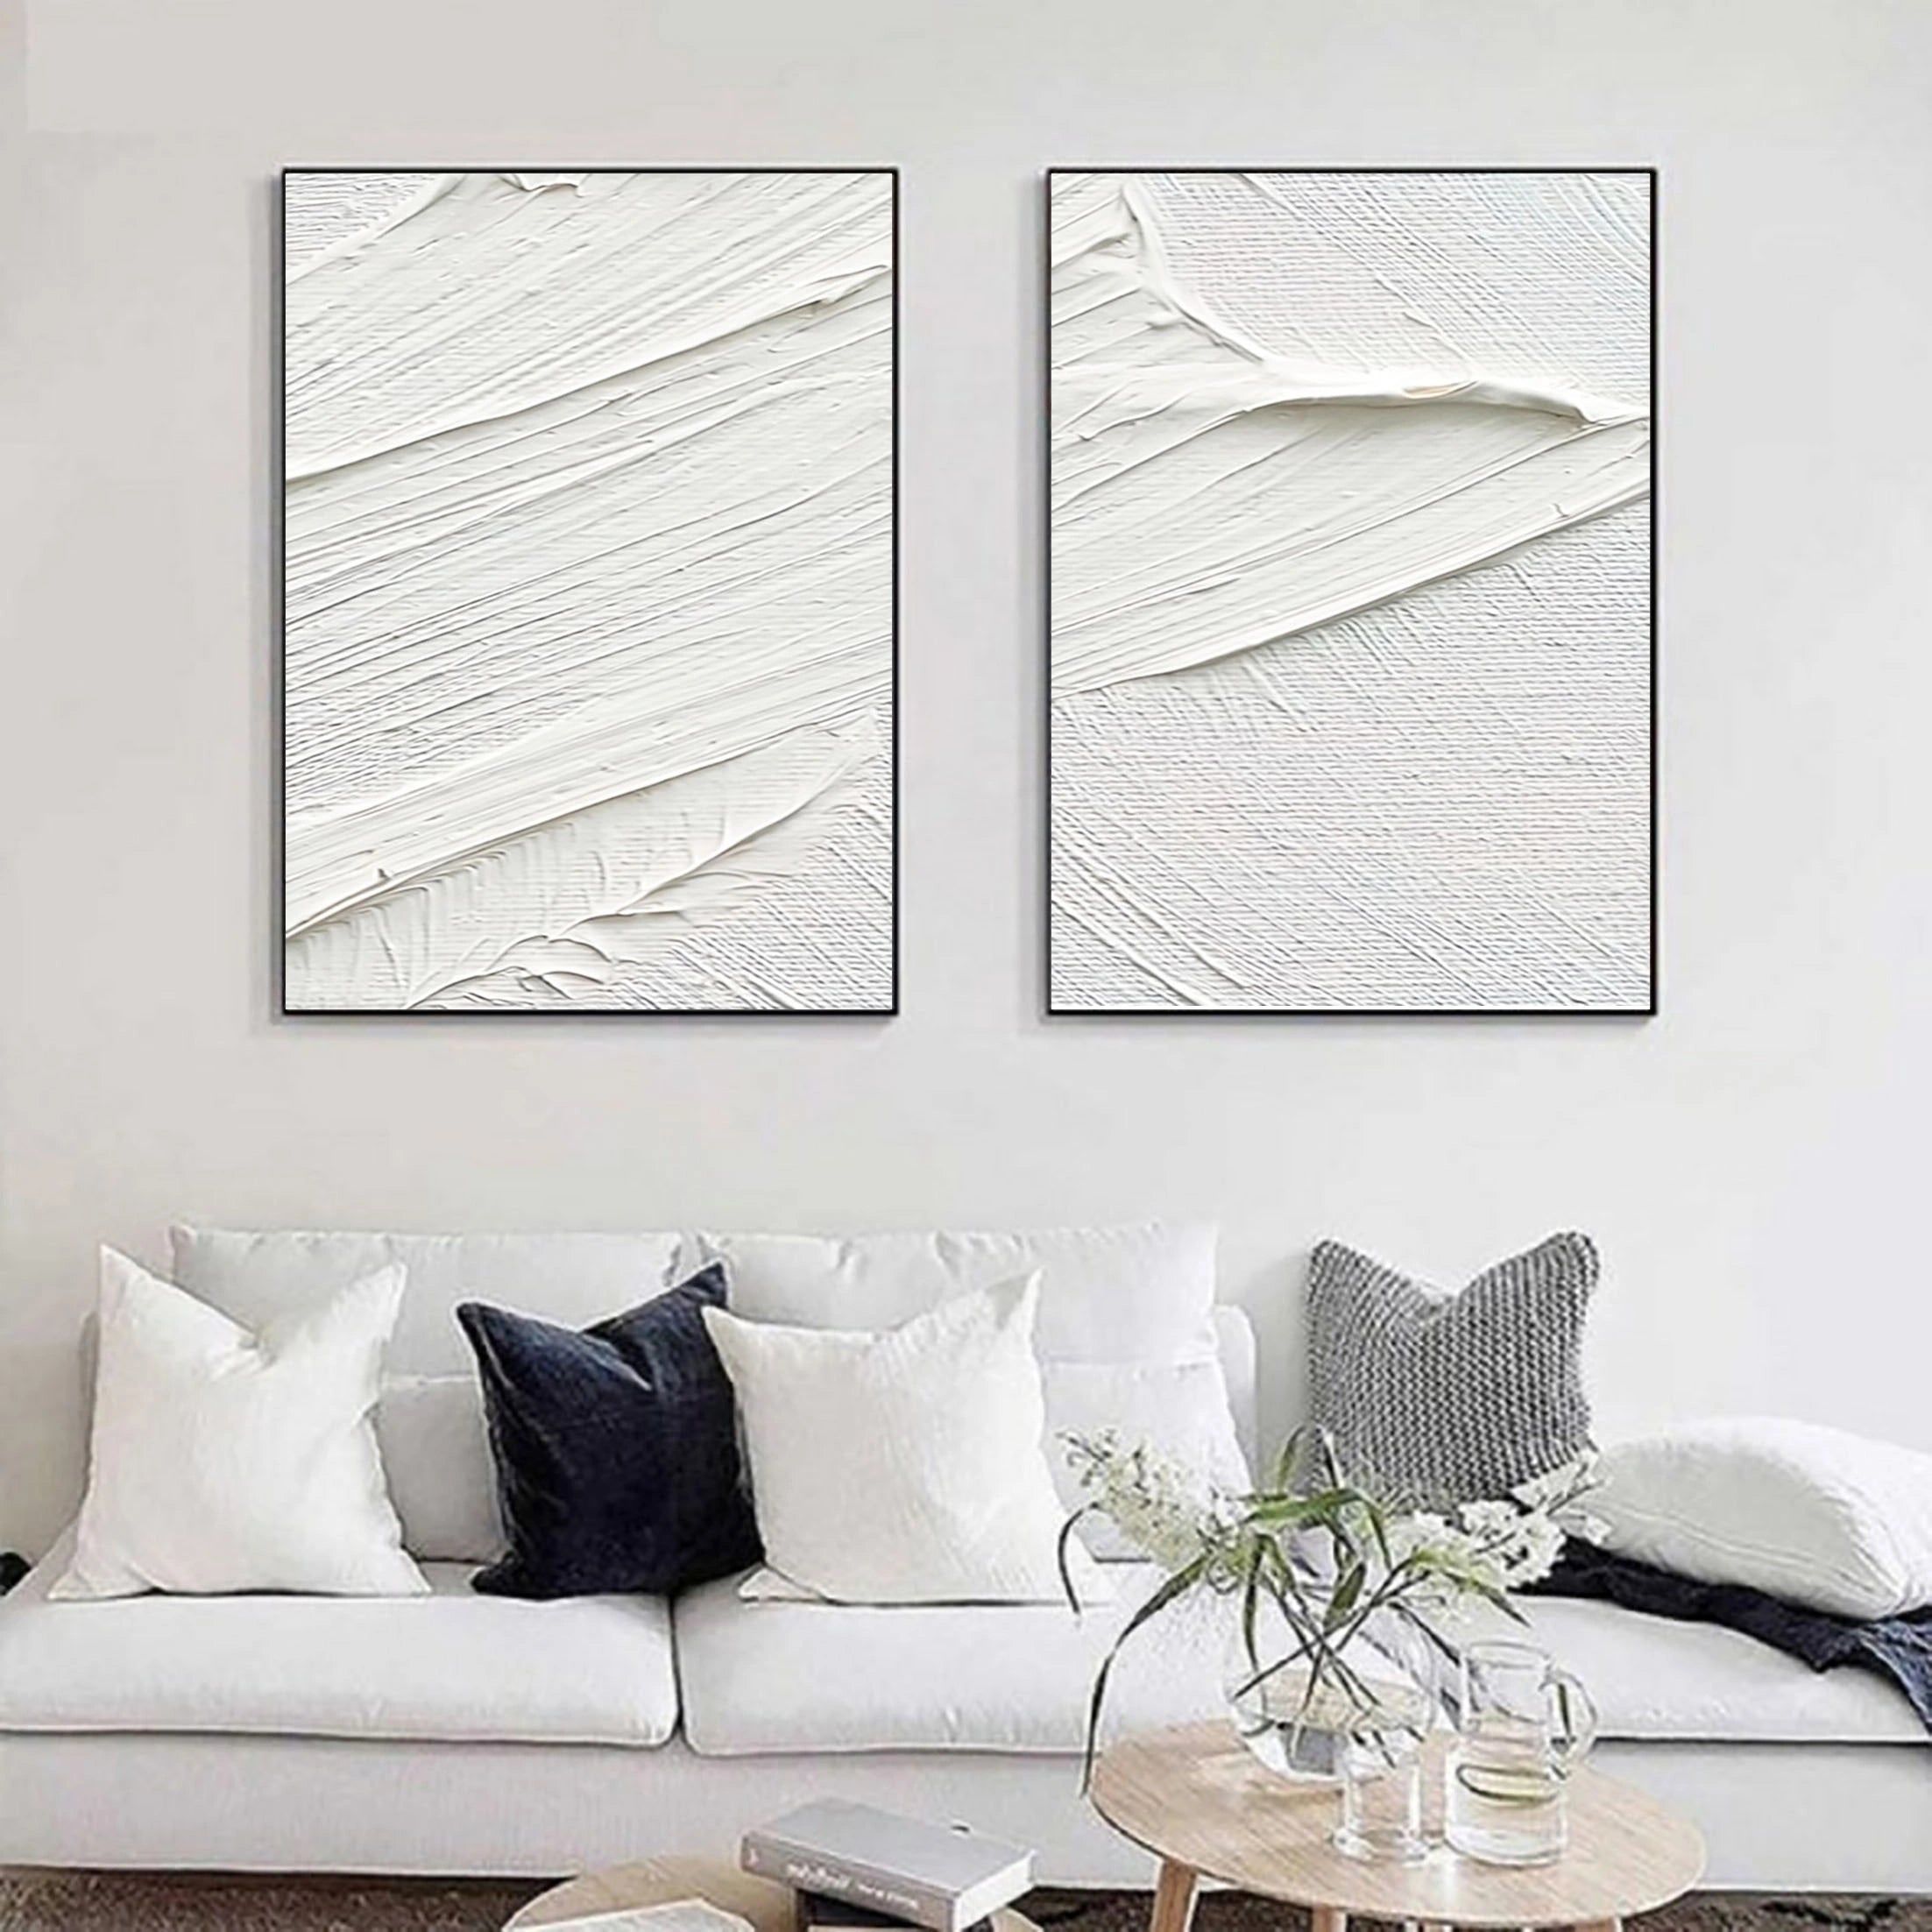 Set of 2 White Plaster Art Textured Painting on Canvas Wall Decor